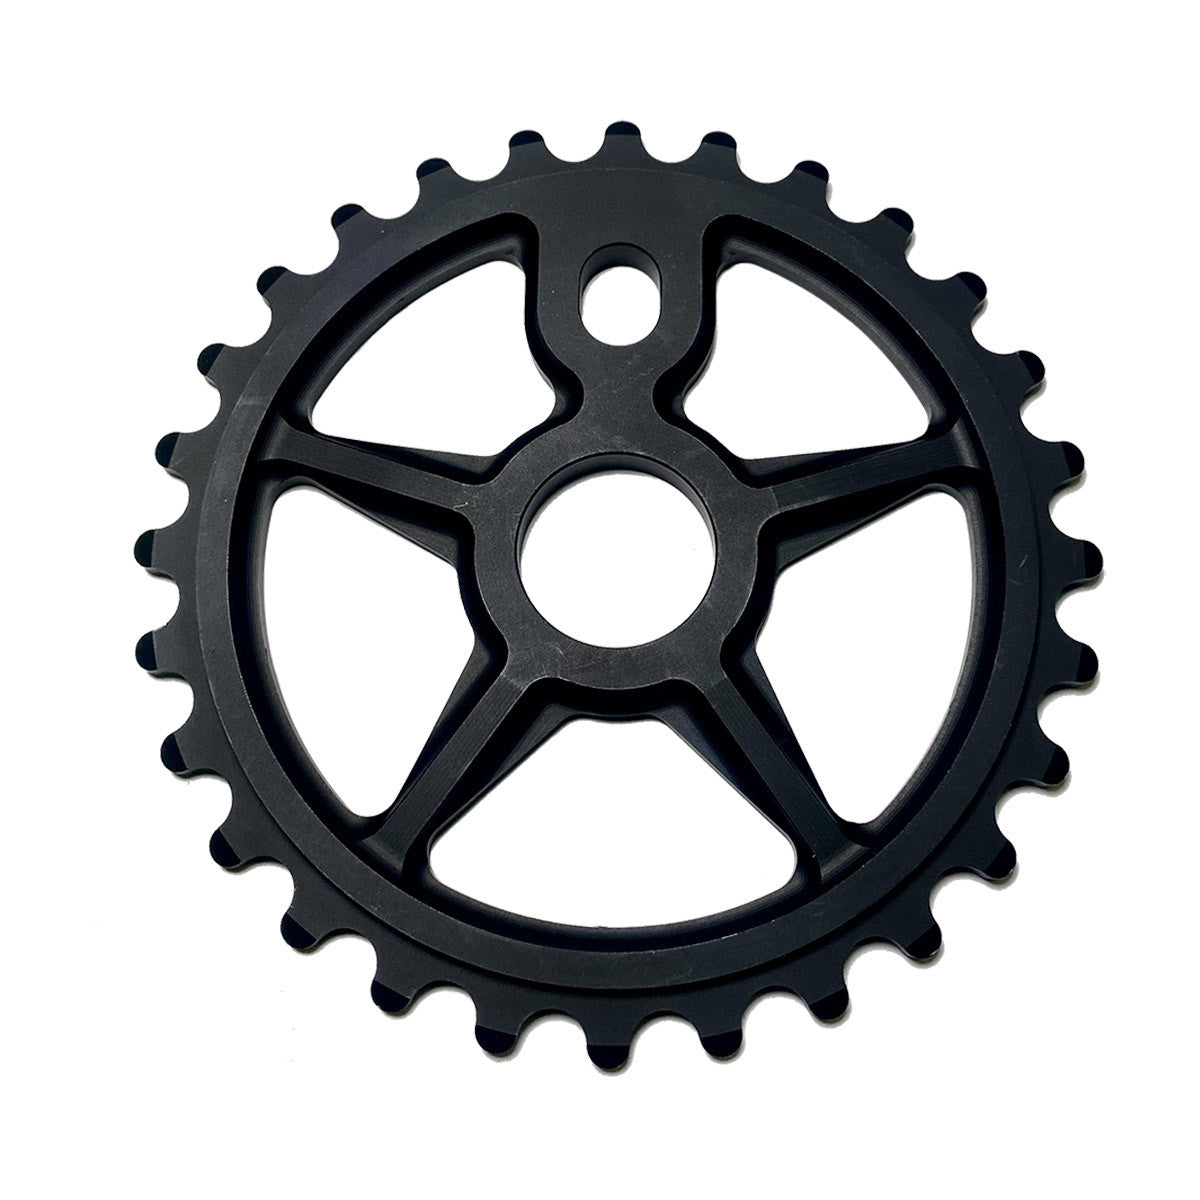 S&M Tuffman Sprocket - Various Options - Downtown Bicycle Works 